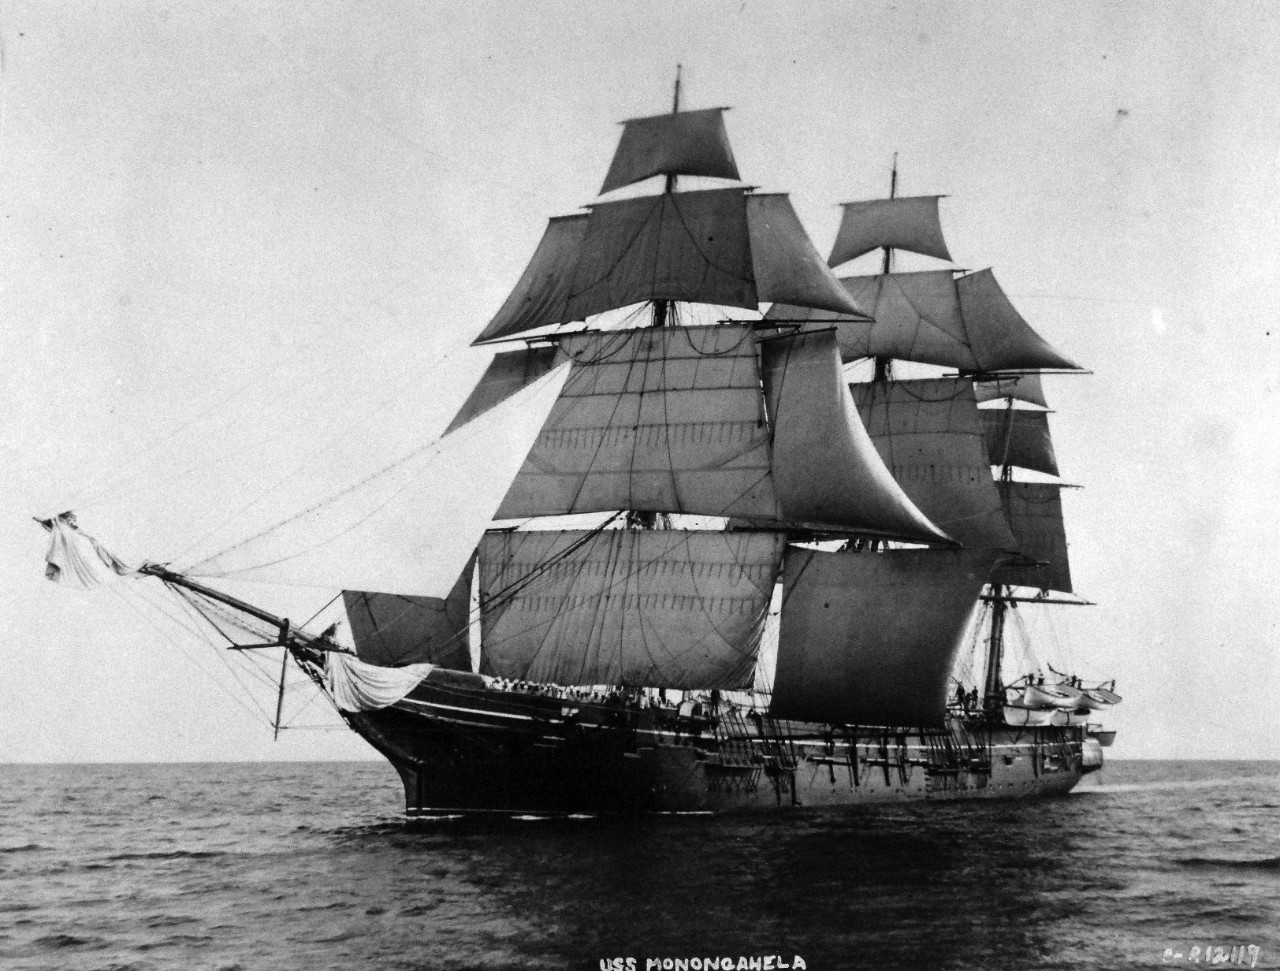 19-N-12119:  USS Monongahela, later 1890s    Port view while under sail while serving as the U.S. Naval Academy Practice Ship.   Official U.S. Navy Photograph, now in the collections of the National Archives.   (2014/7/10).